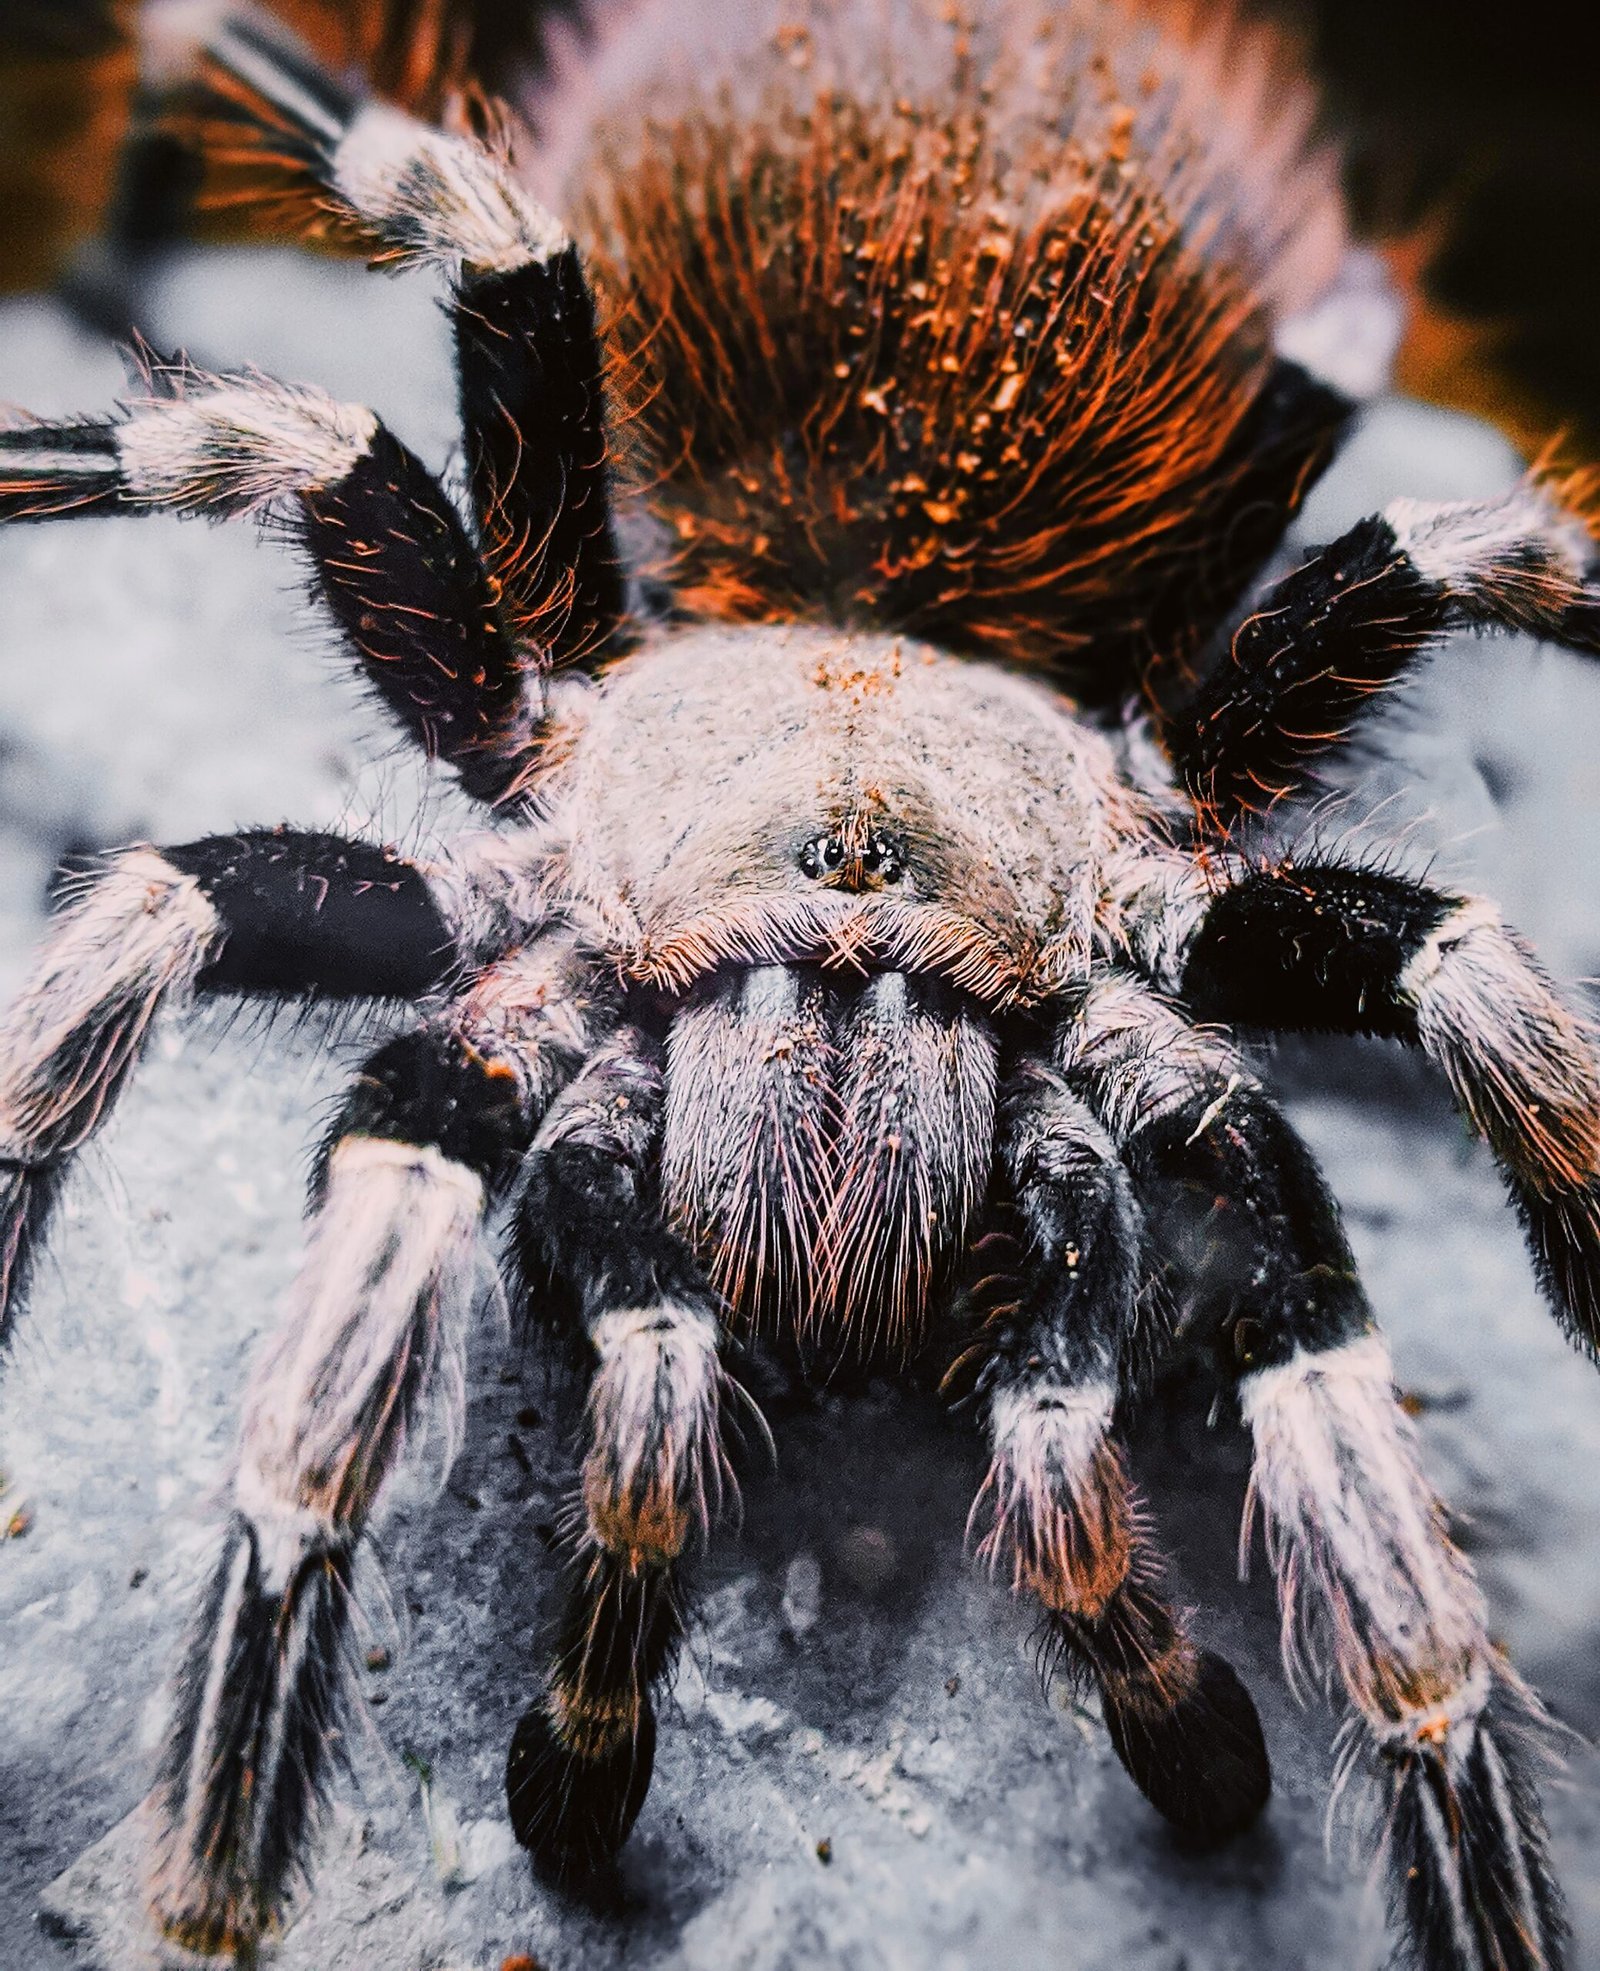 Are There Specific Health Issues I Should Watch For In Breeding Tarantulas?